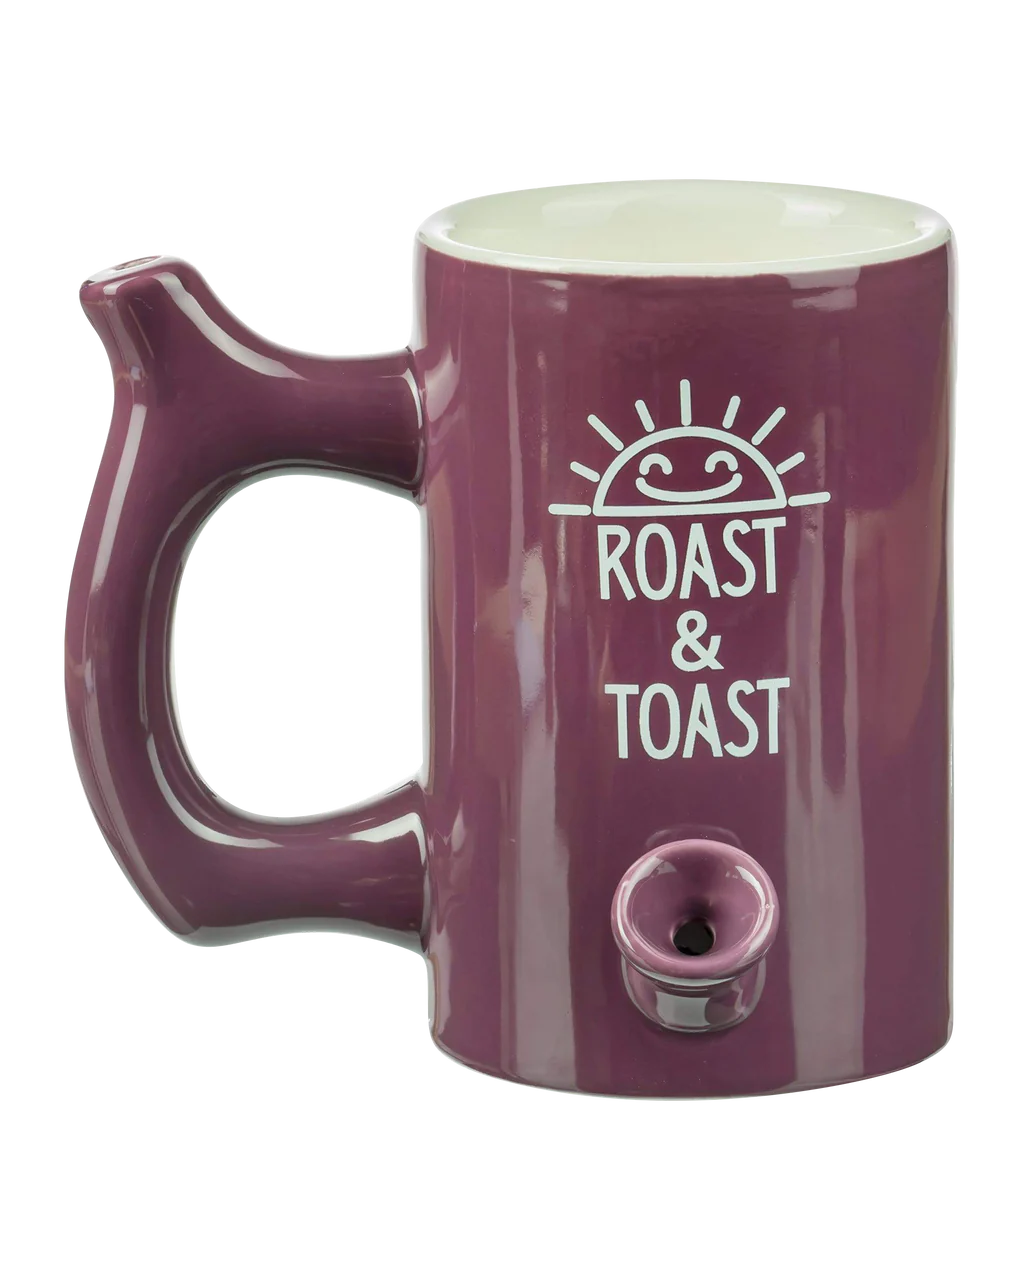 Roast & Toast Ceramic Pipe Mug in Purple - Front View - Ideal for Dry Herbs